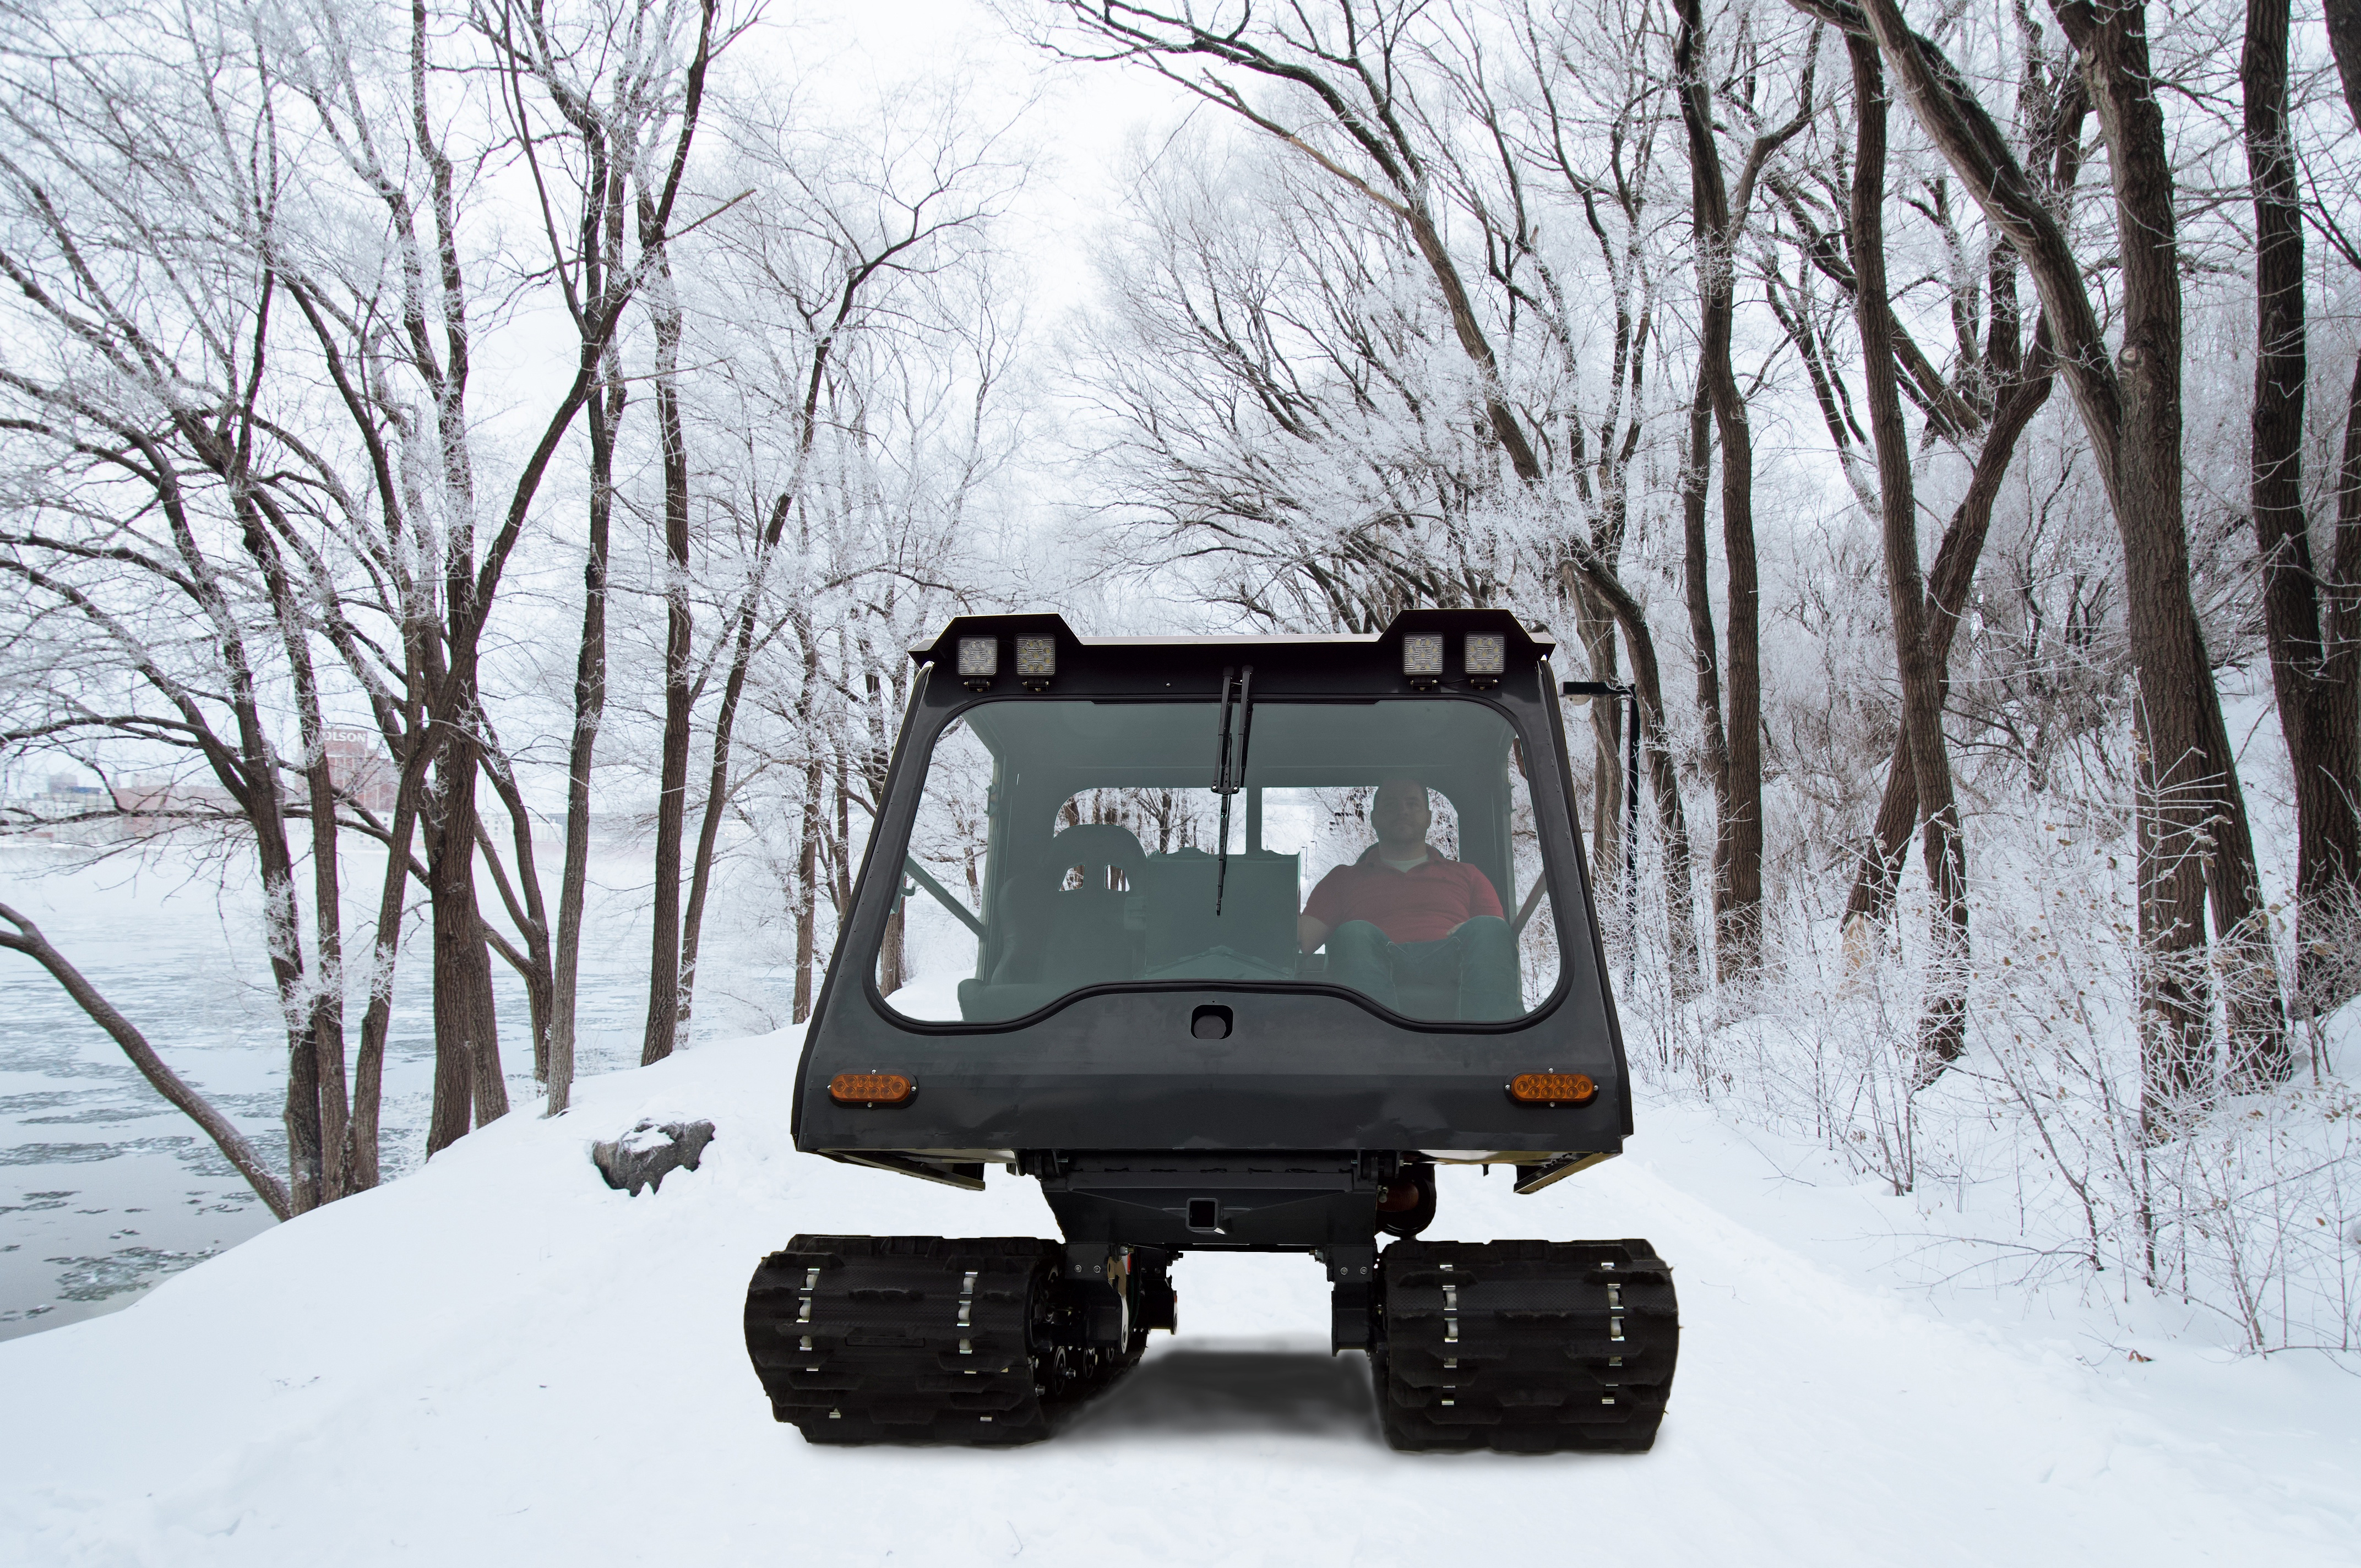 Personal Winter Tracked Vehicle, Remote Access Machine